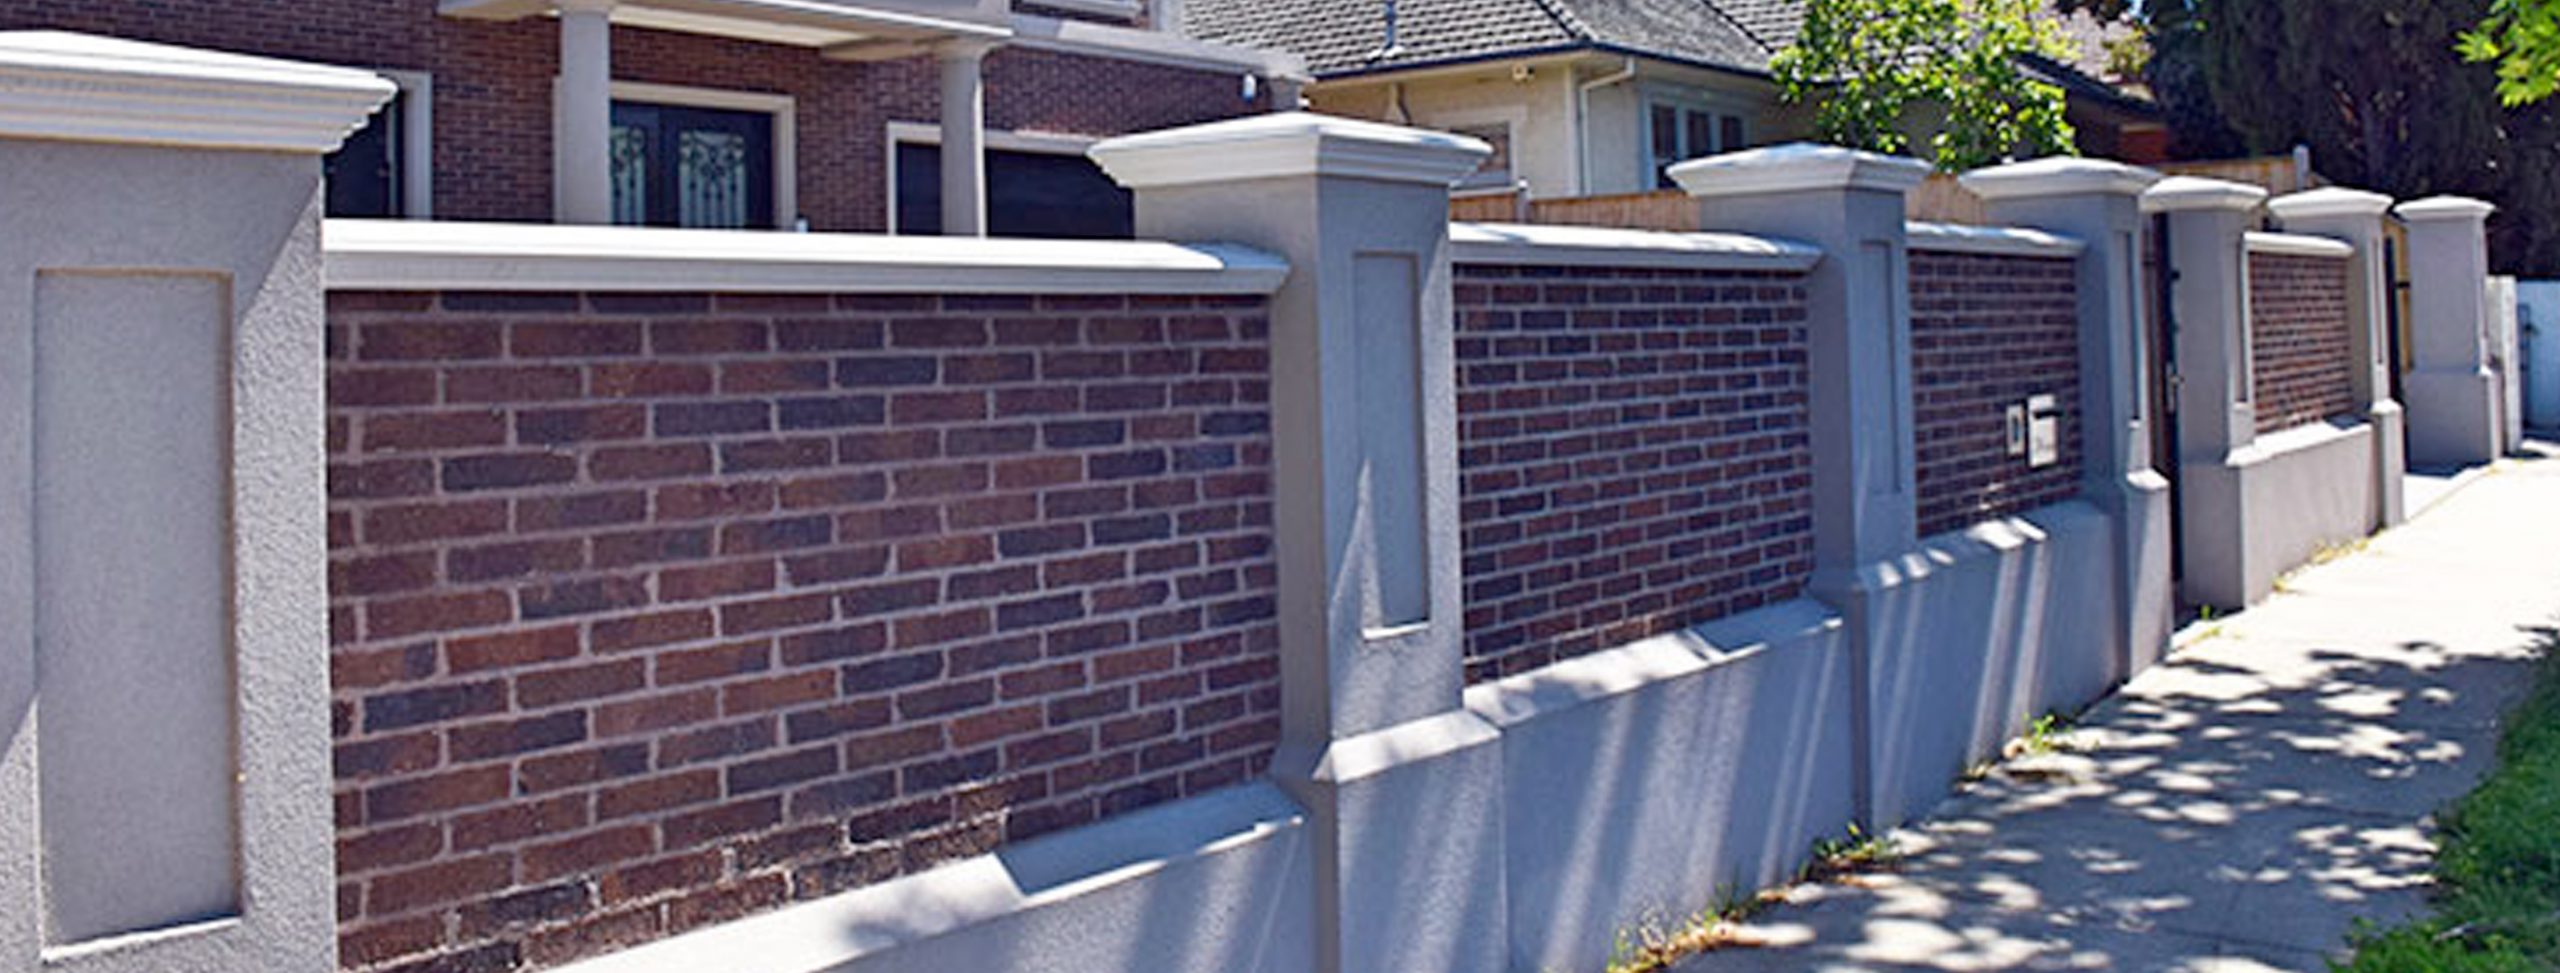 Rendered Pillars with brick infill wall designed and built by Custom Built Fences